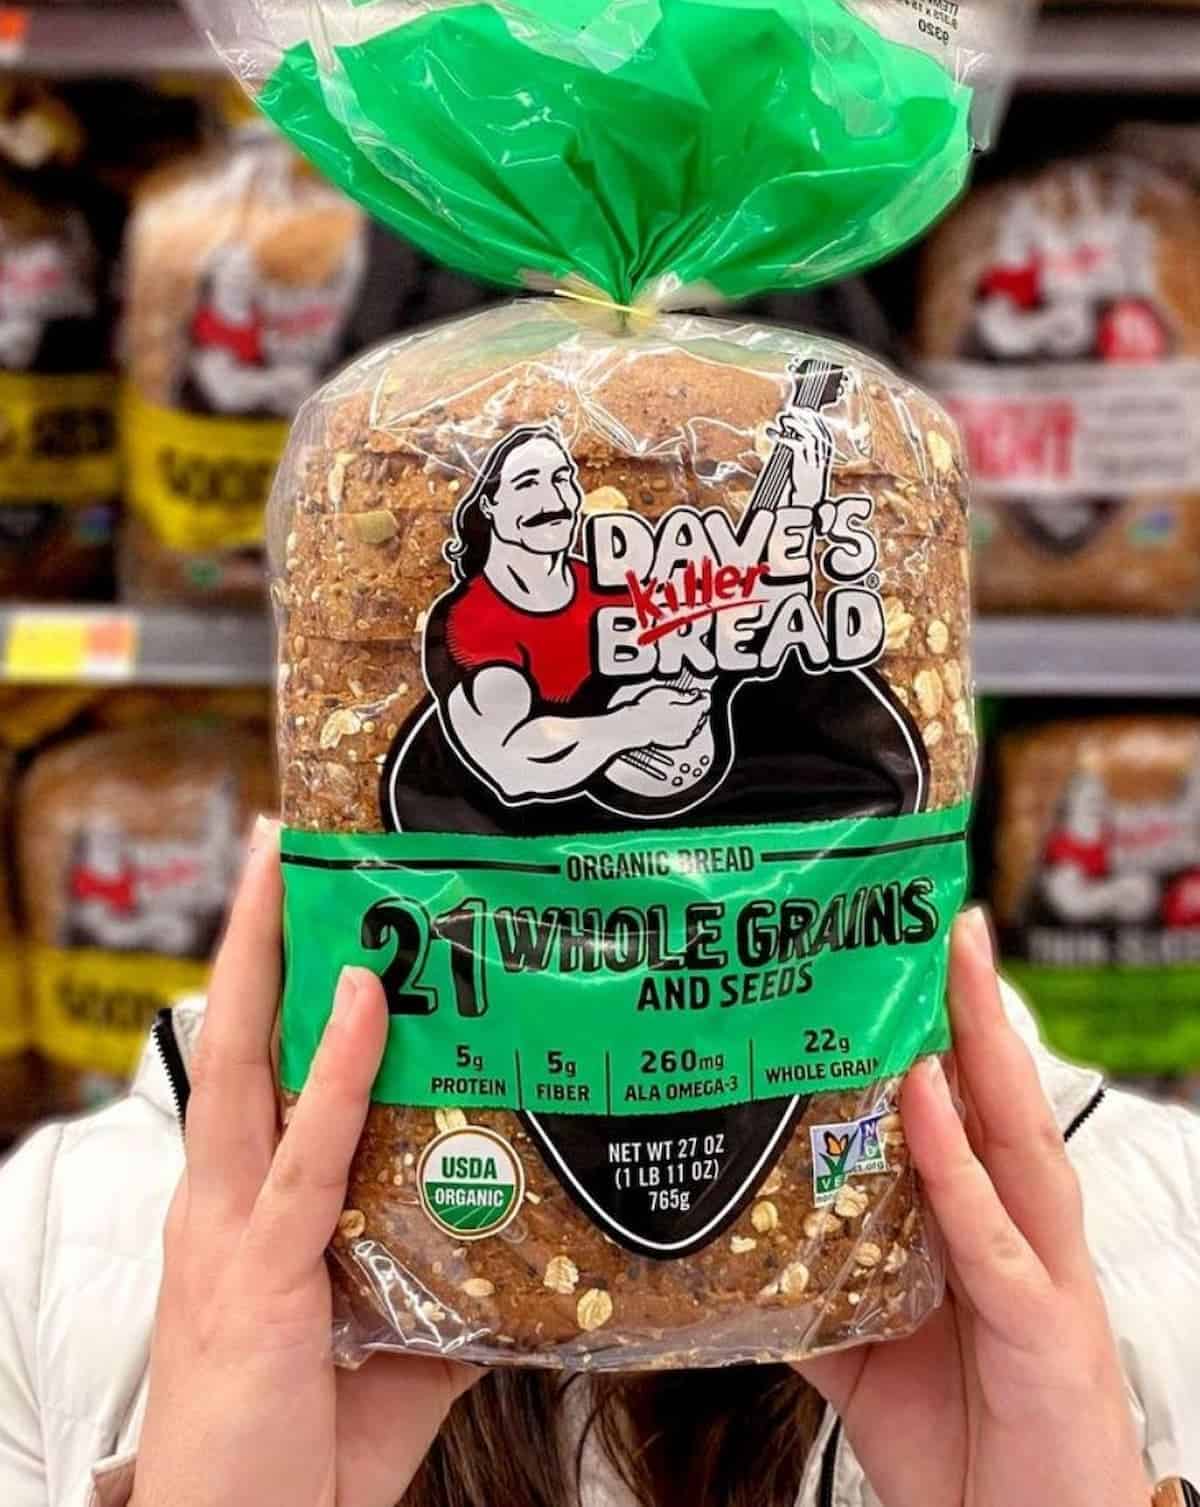 A package of Dave's Killer Bread.